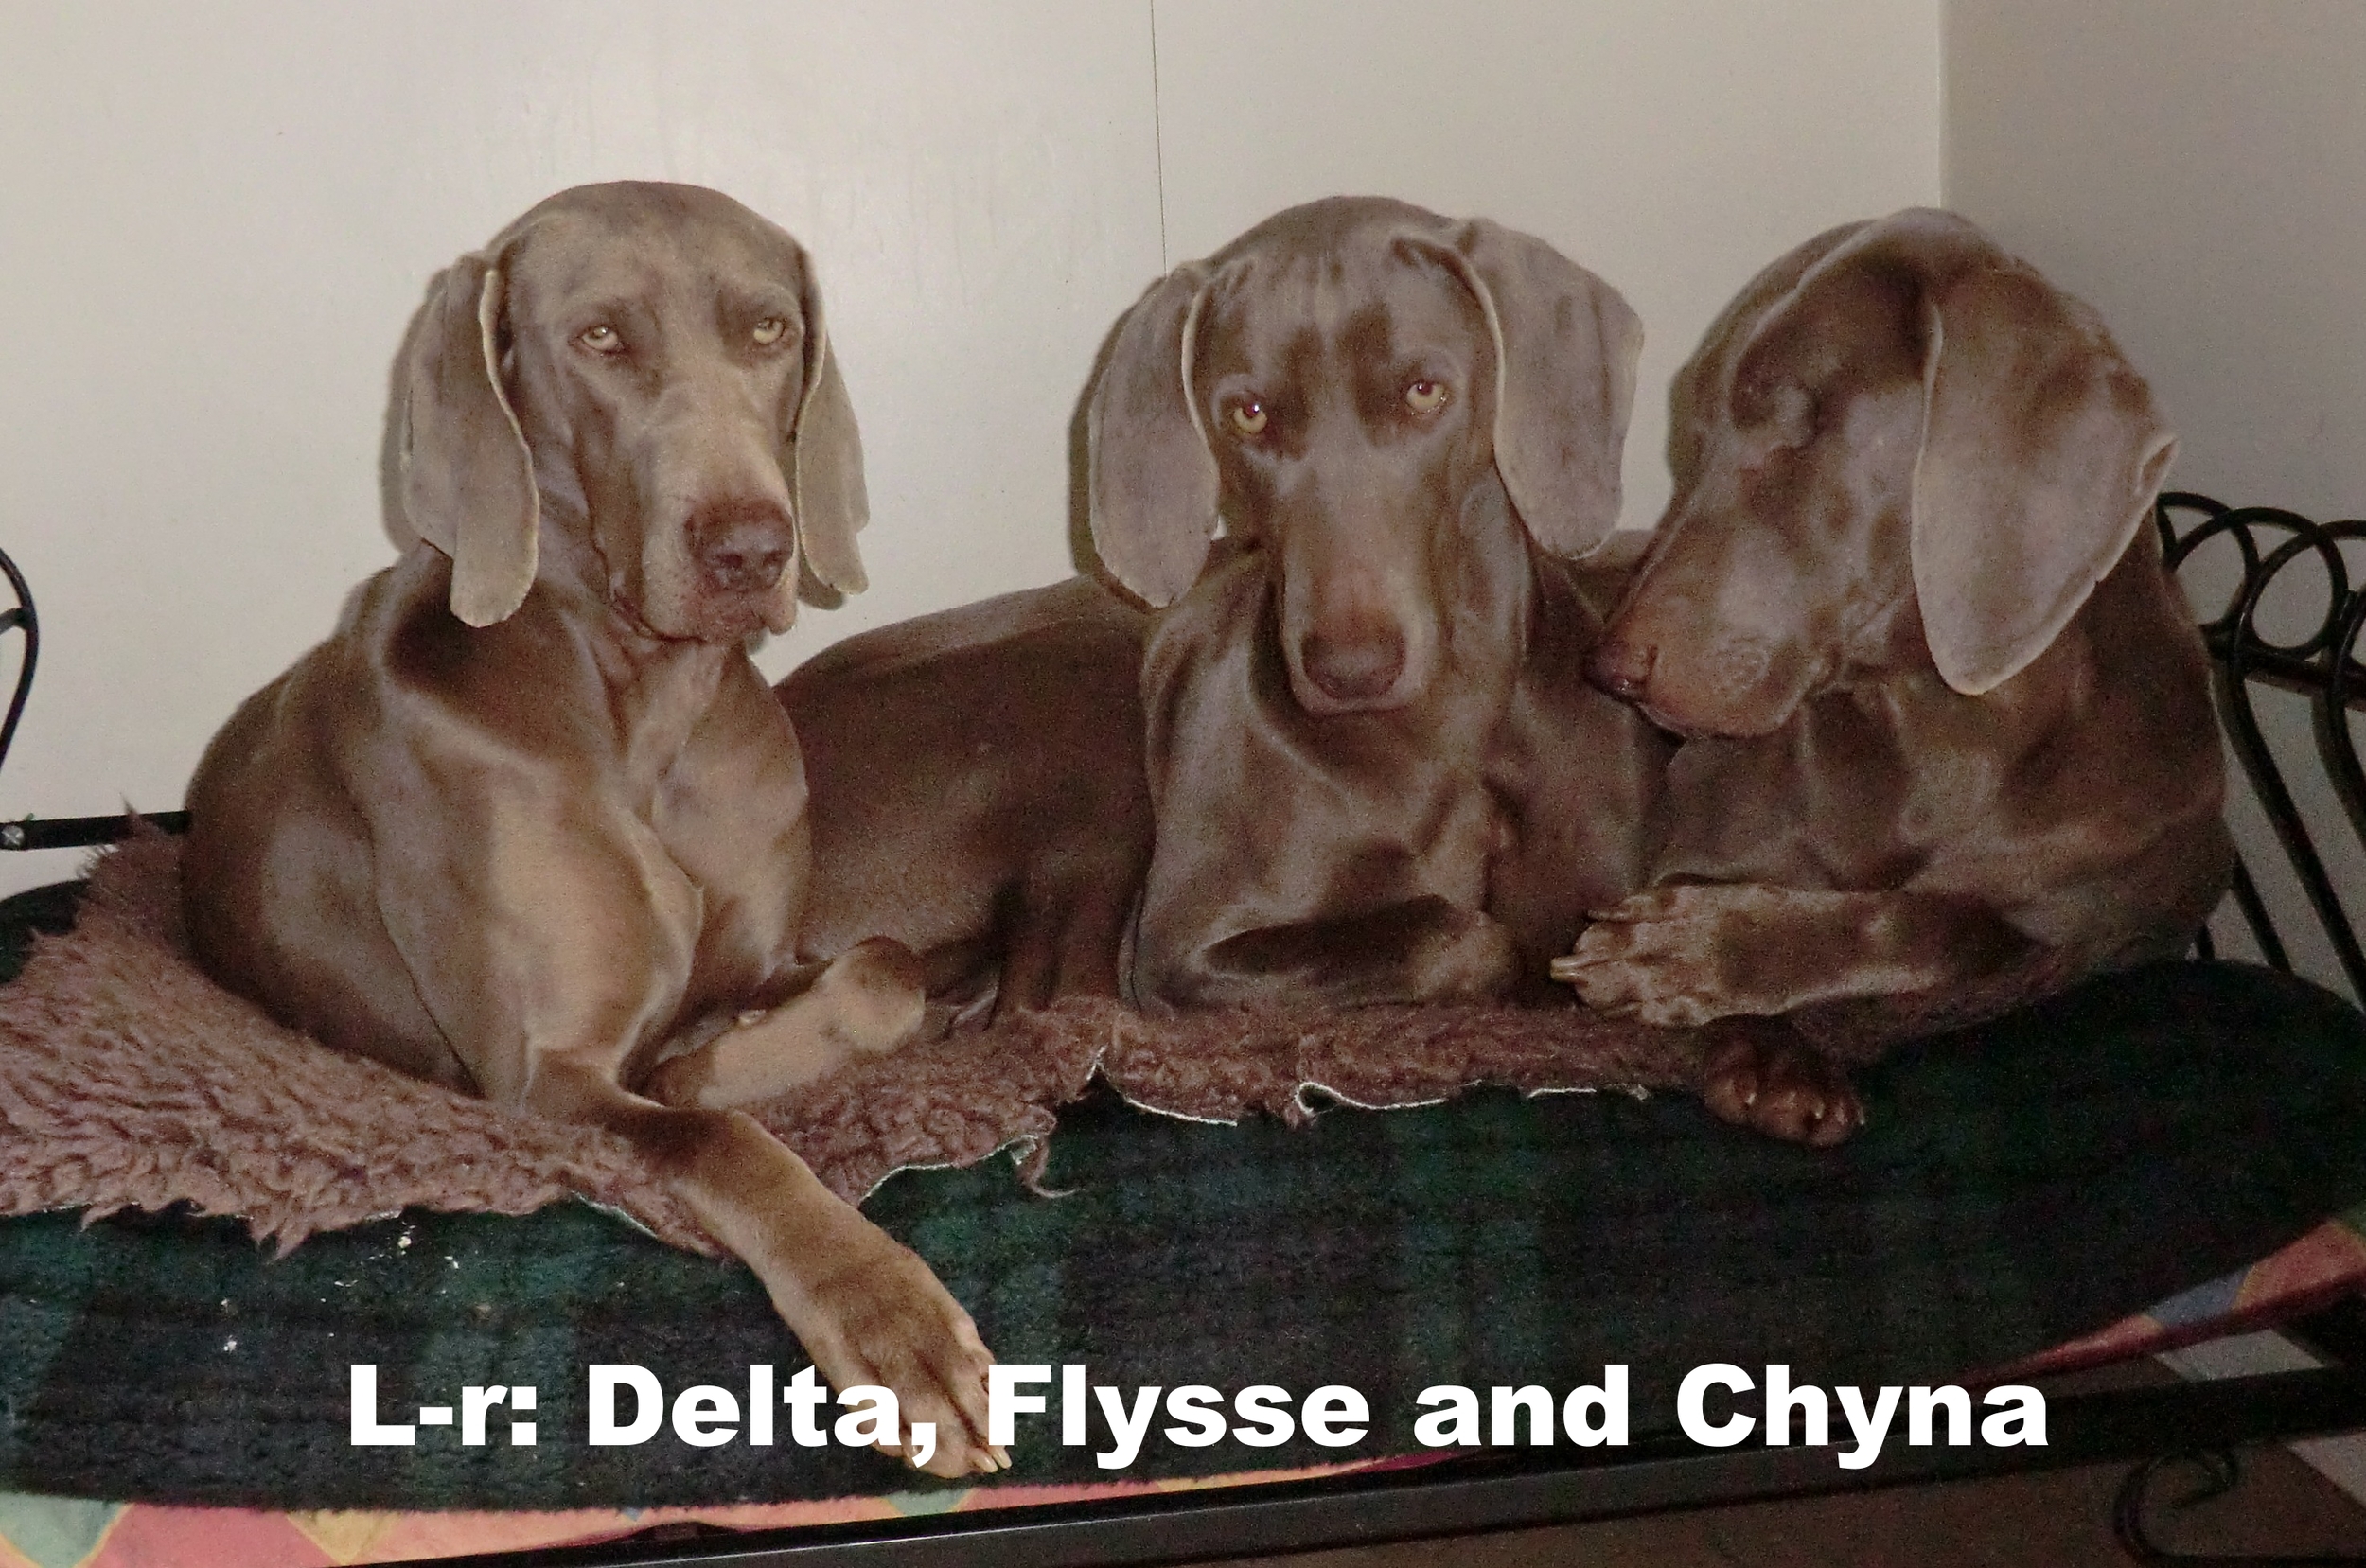 L-r: Delta, Flysse and Chyna